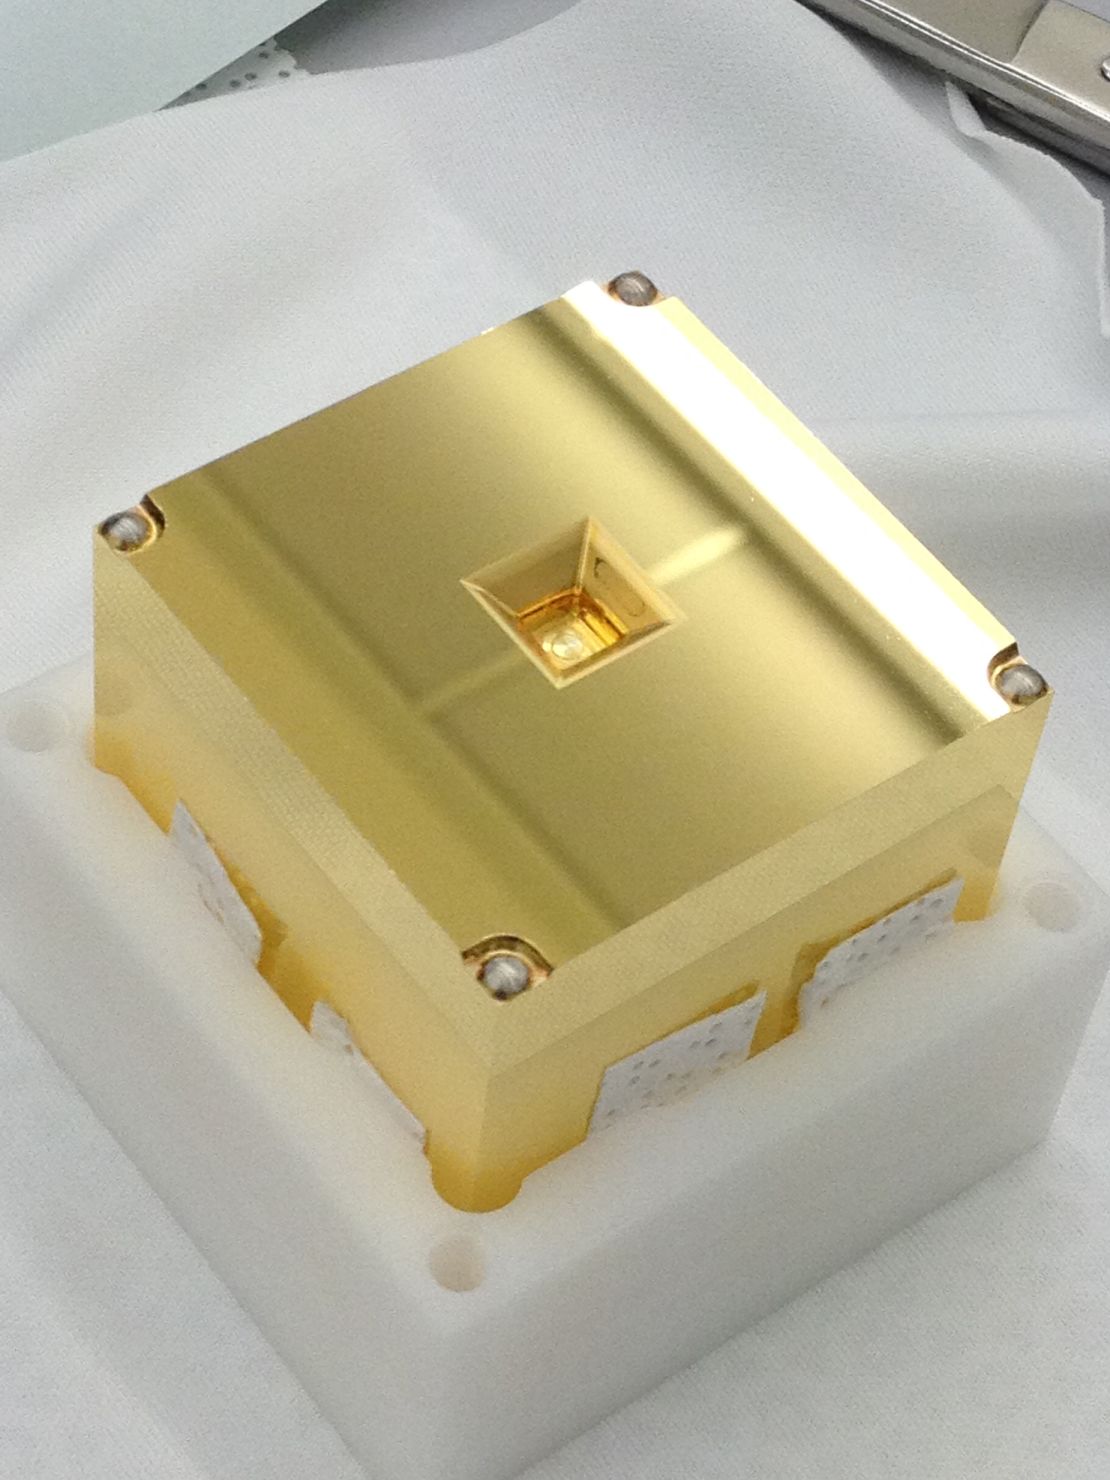 Golden cubes inside each spacecraft will help the LISA mission detect gravitational waves.